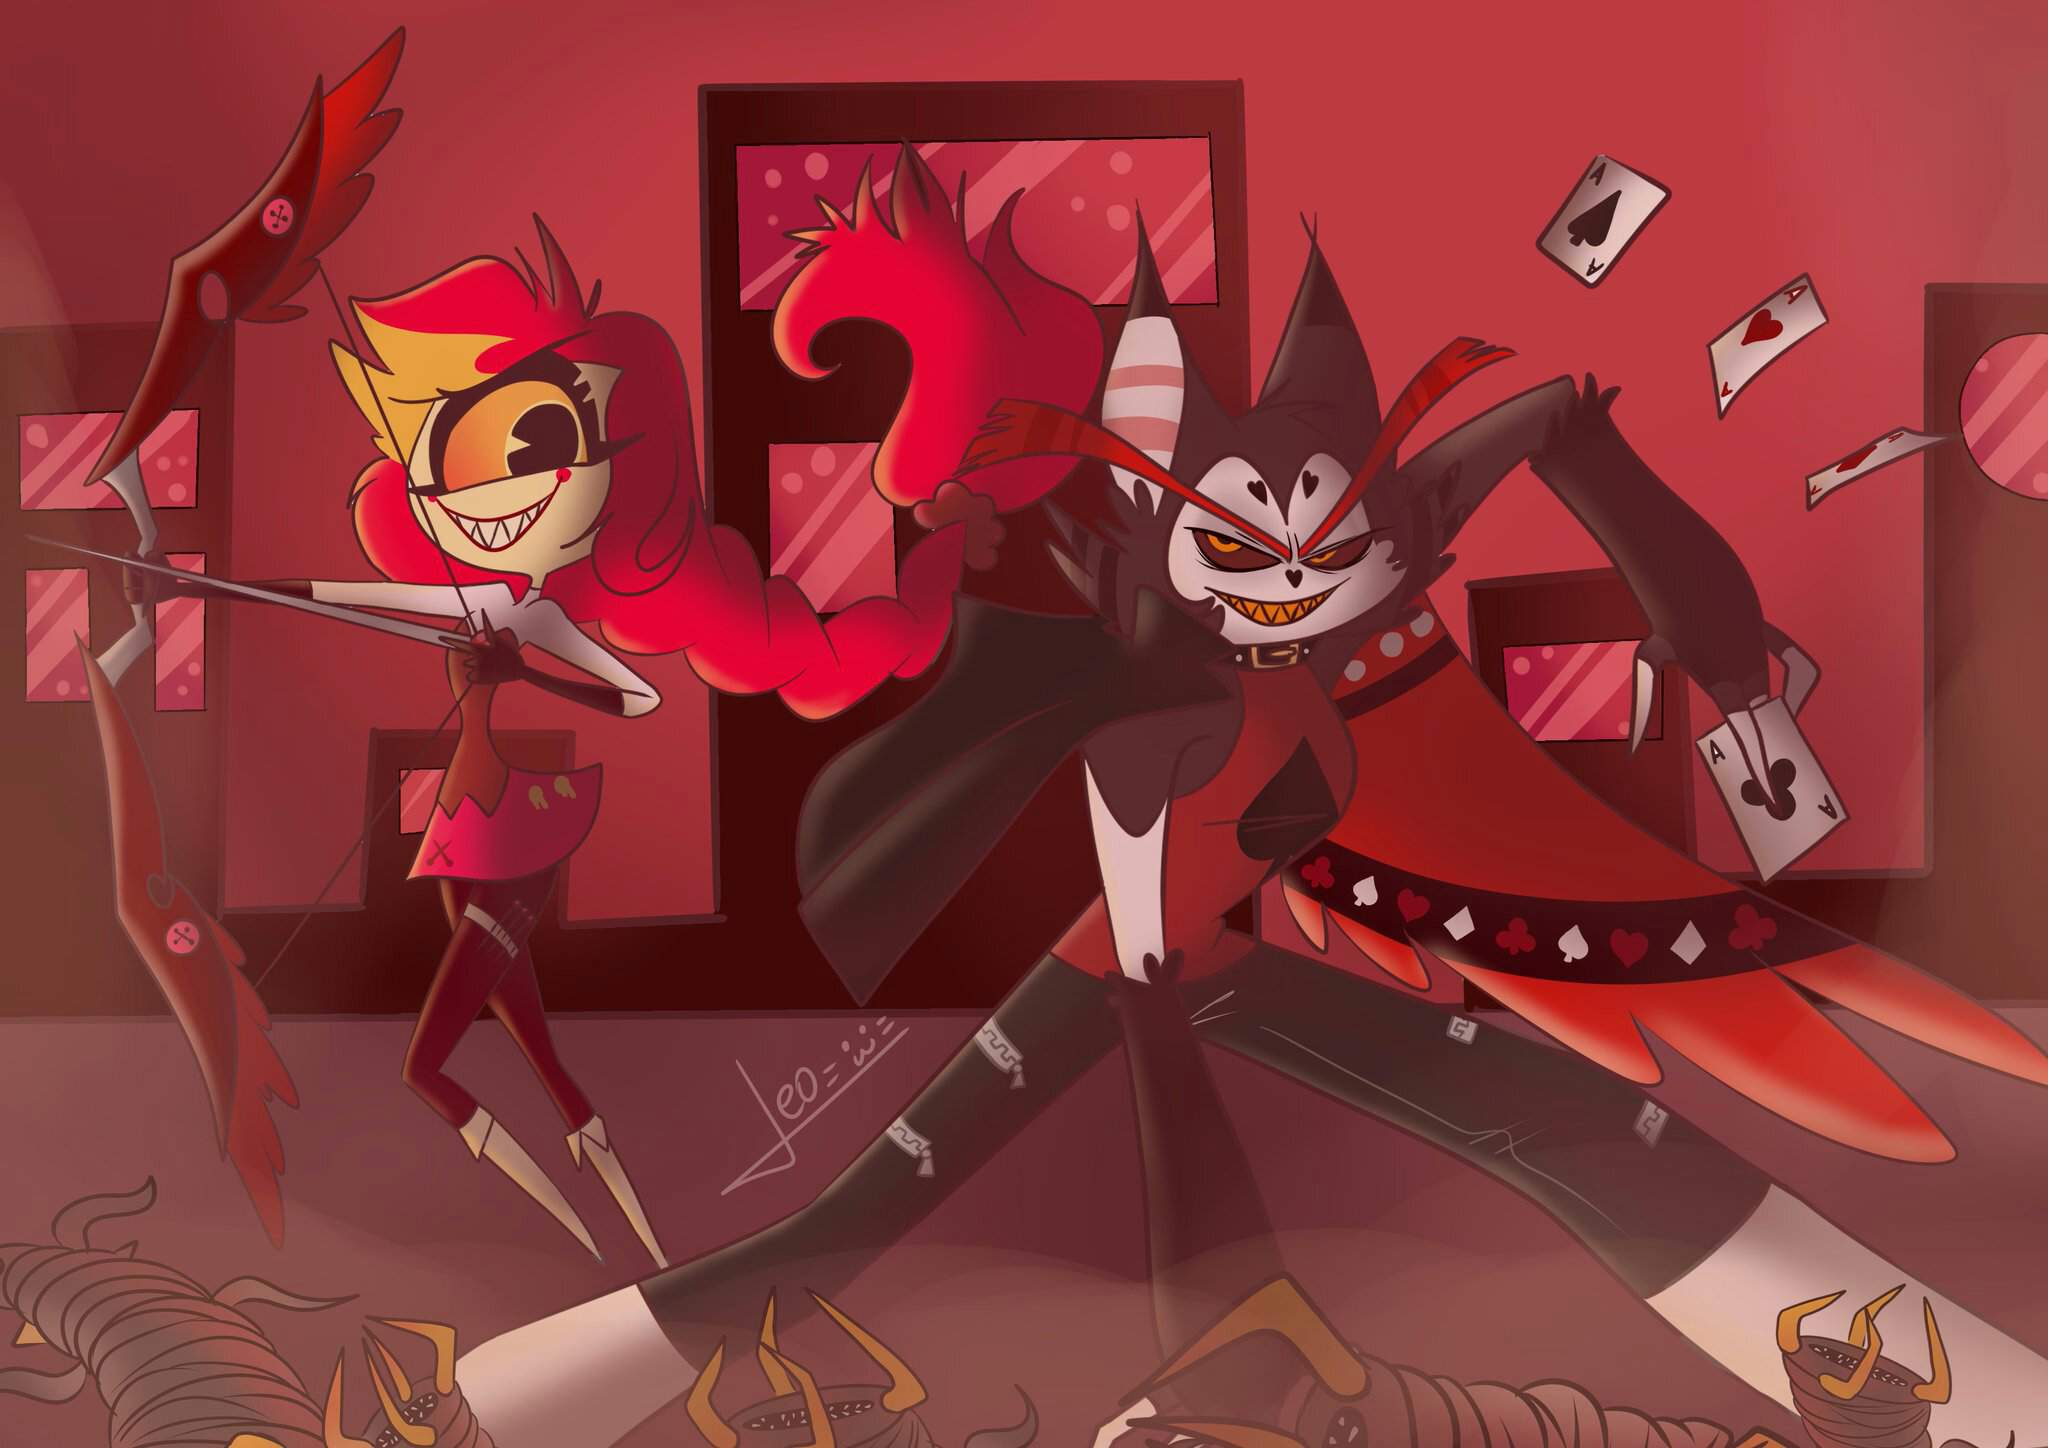 Redemption Husk and Nifty Hazbin Hotel (official) Amino.